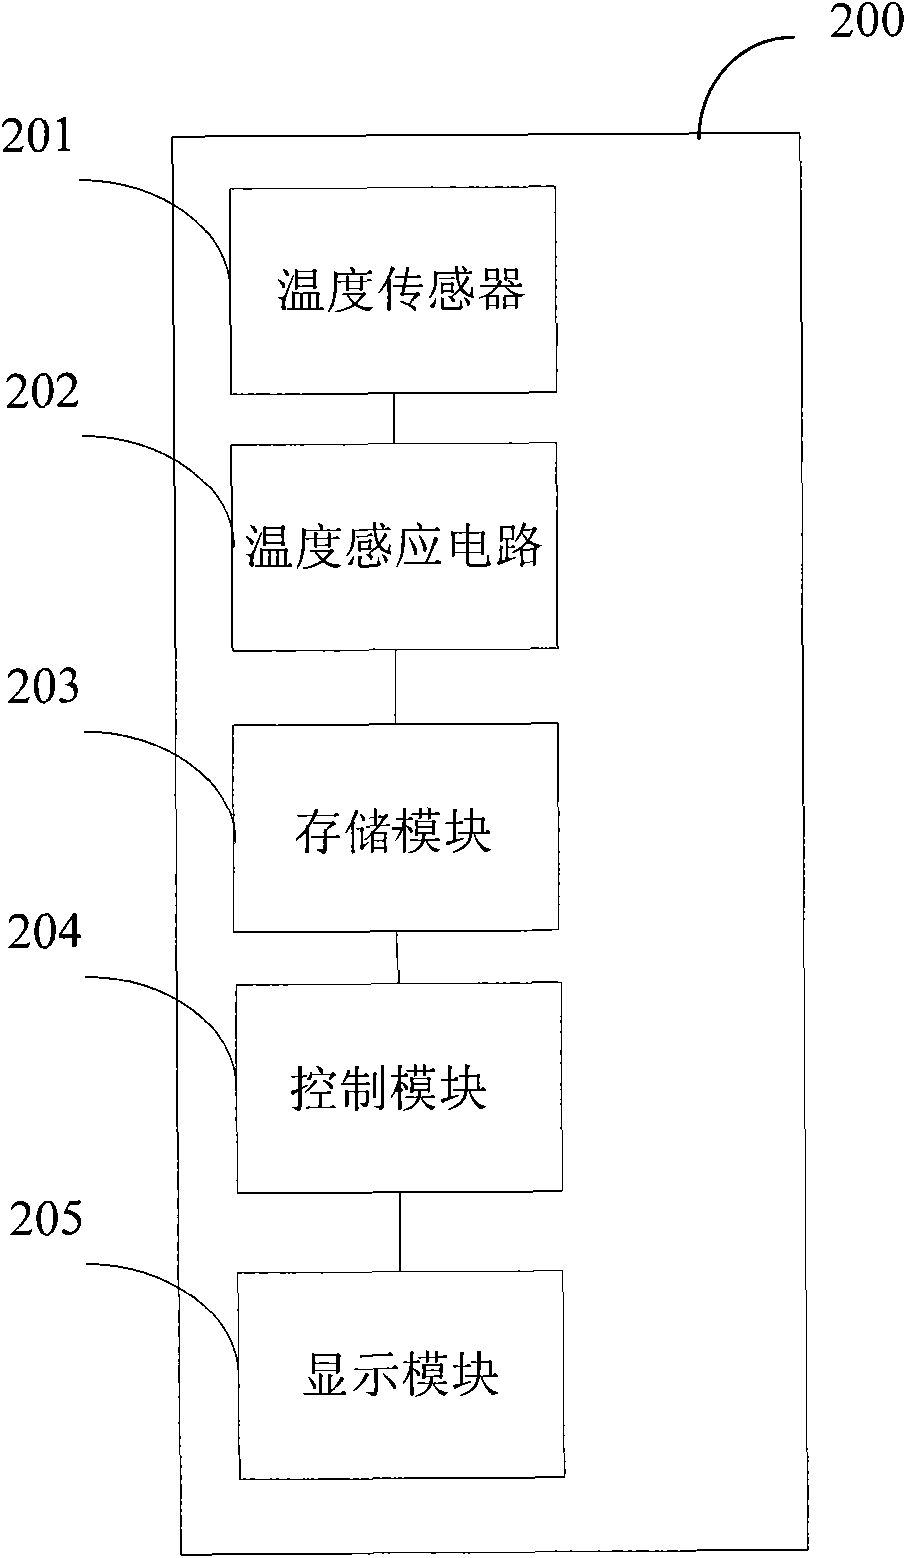 Mobile terminal and method for automatically updating subject mode